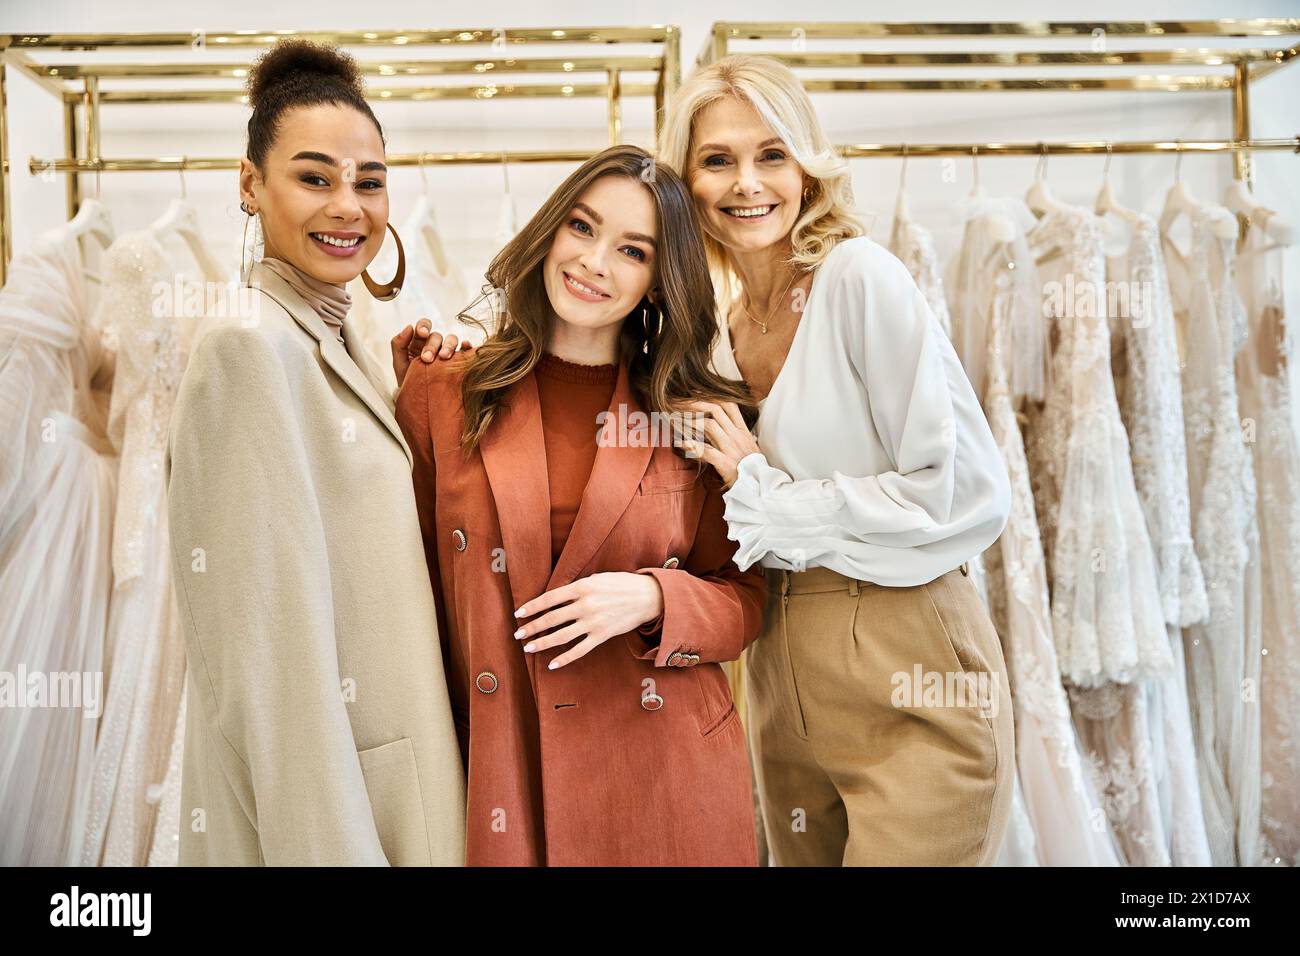 A young bride, her mother, and best friend stand by a rack of dresses, shopping for the perfect wedding gown. Stock Photo